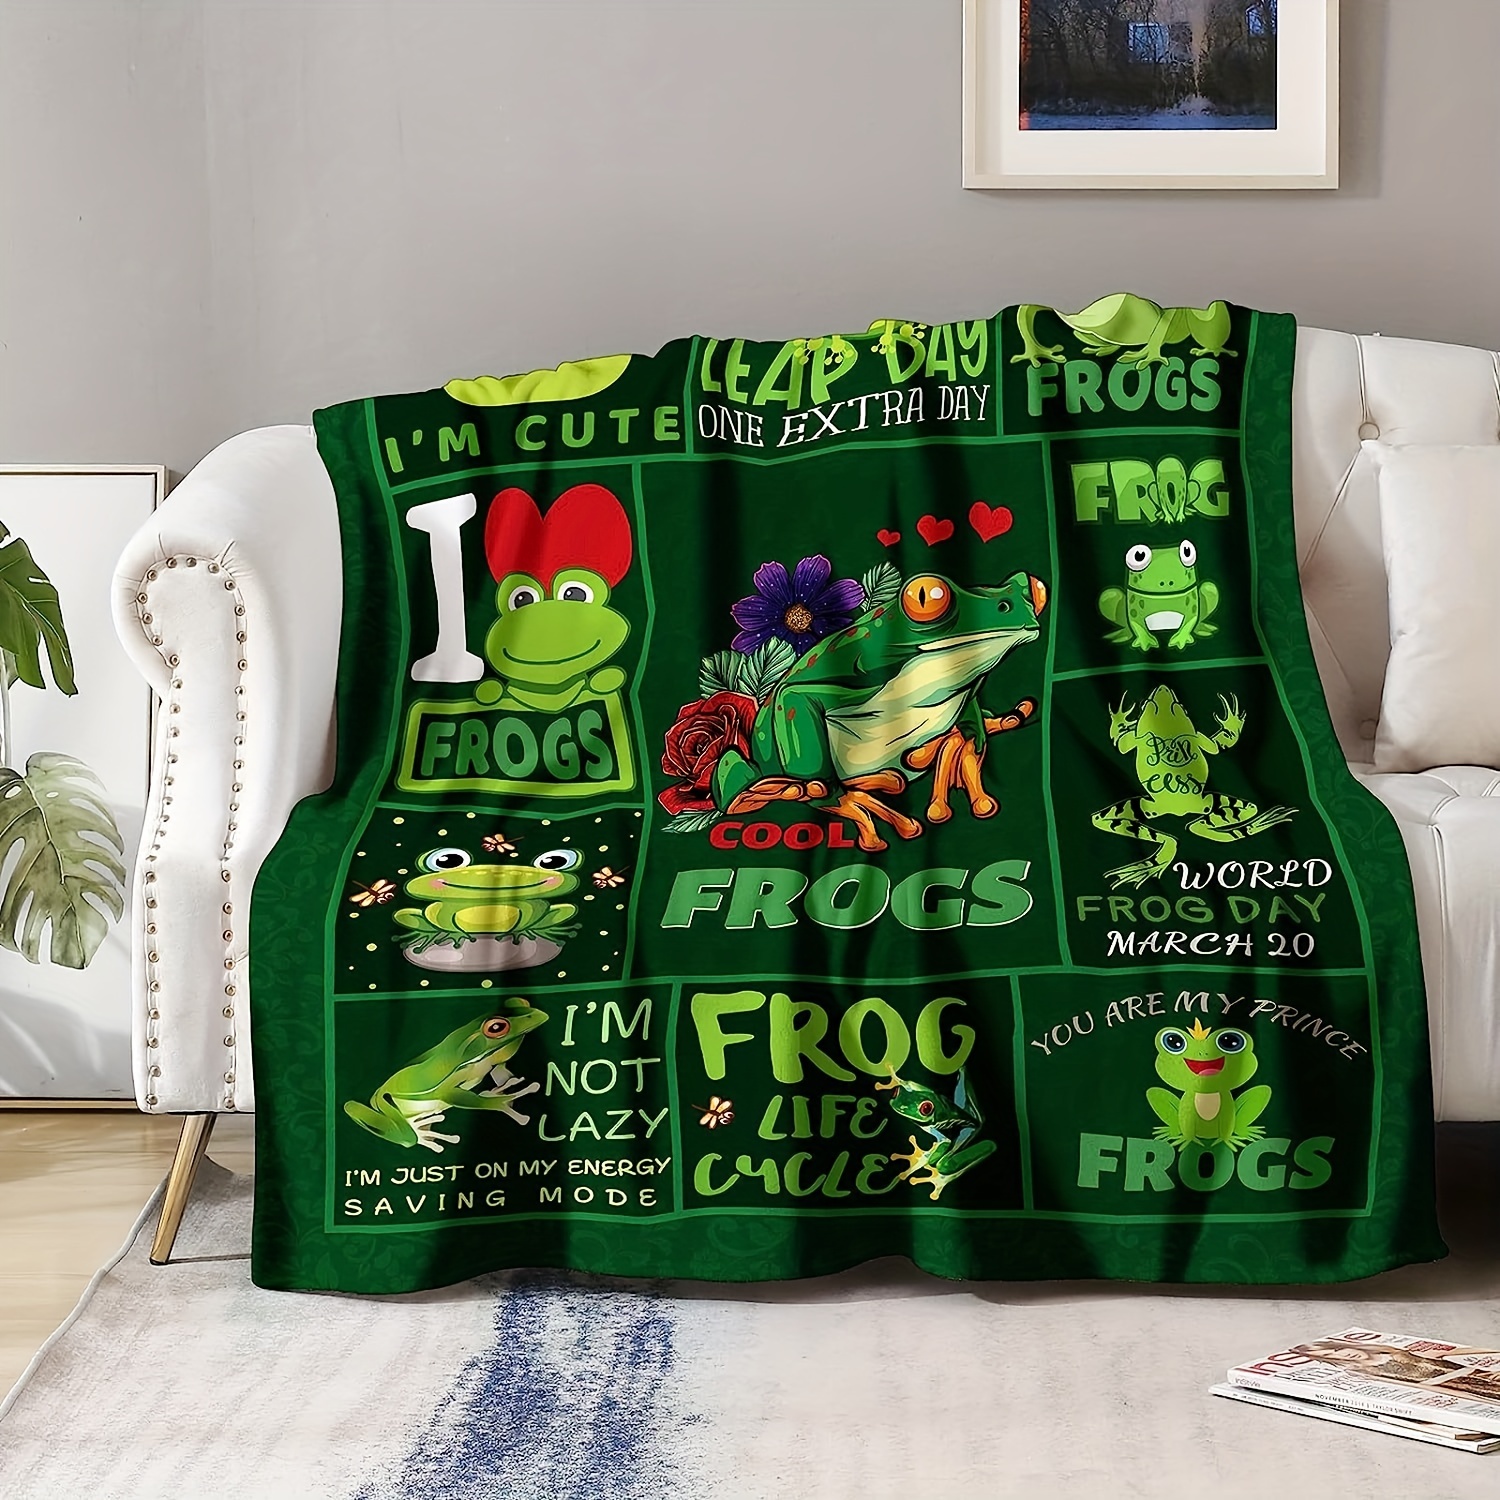 1pc Frog Blanket Gifts, Cute Frogs Stuff Decor Throw For Frog Lovers, Soft  Cozy Couch Bedroom Animal Birthday Gifts For Adults Teen Boys Girls